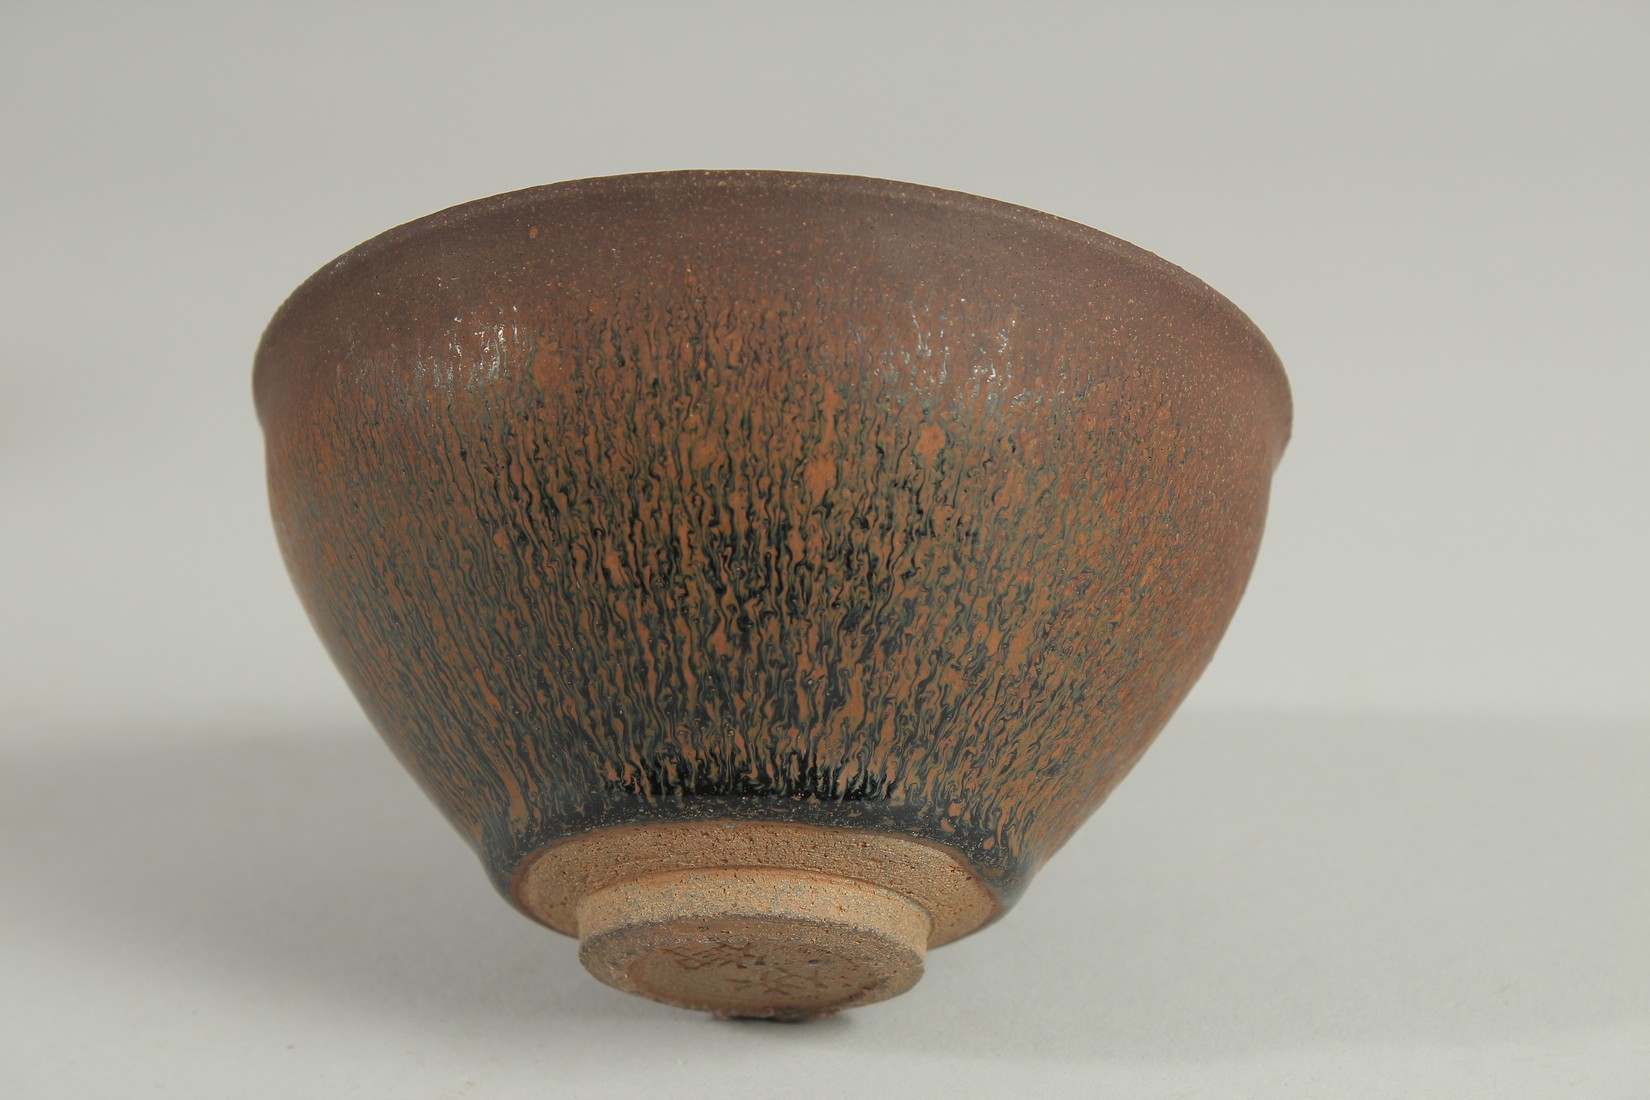 A CHINESE JIAN WARE BOWL, with hare's fur glaze, 12.5cm diameter. - Image 5 of 5